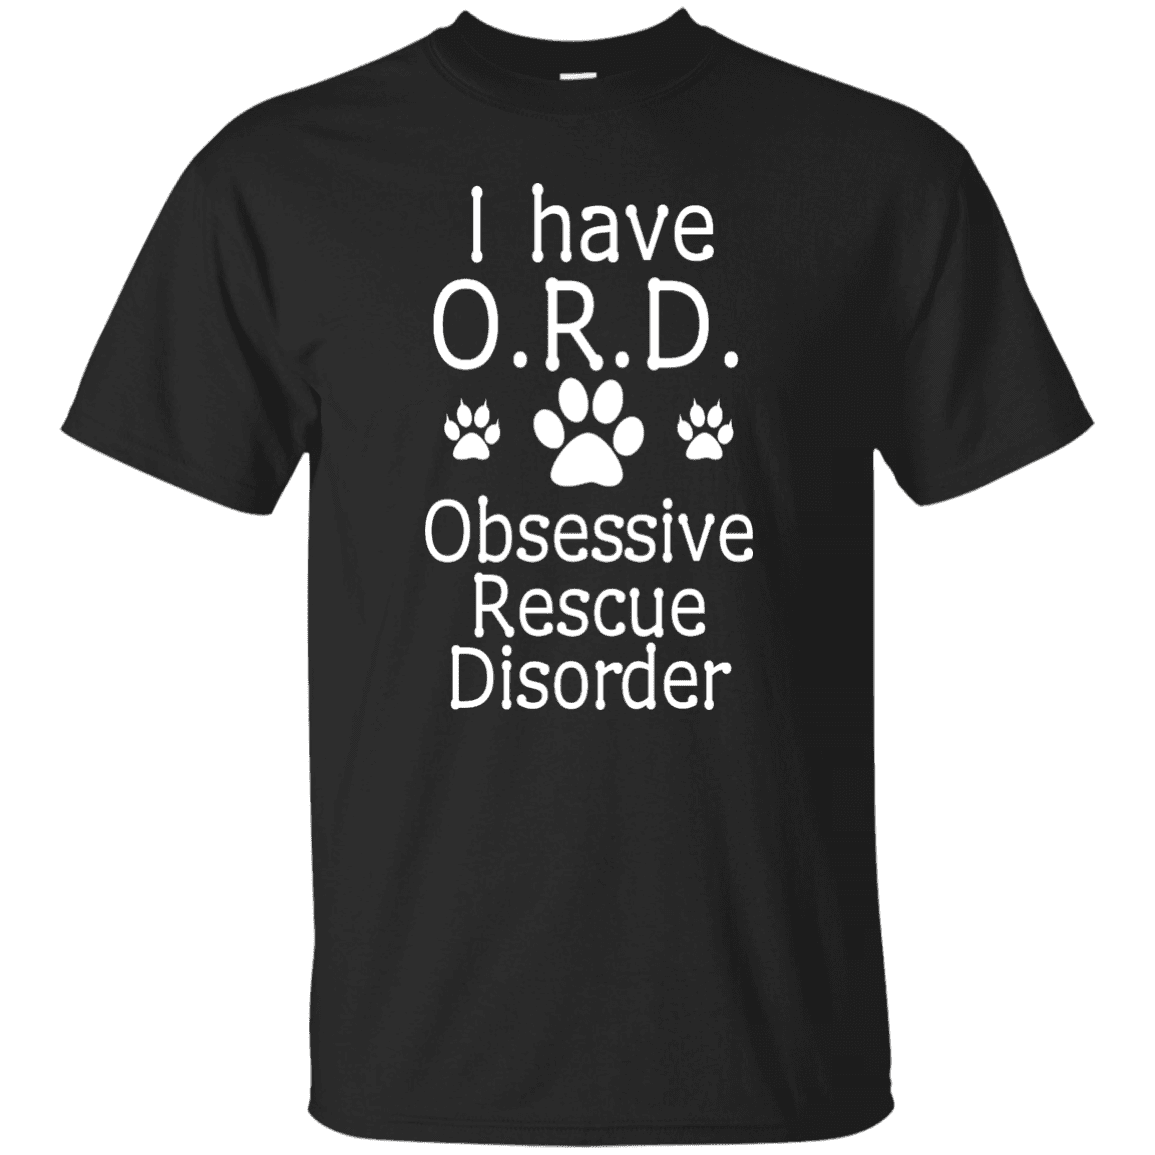 I Have O.R.D - T Shirt.